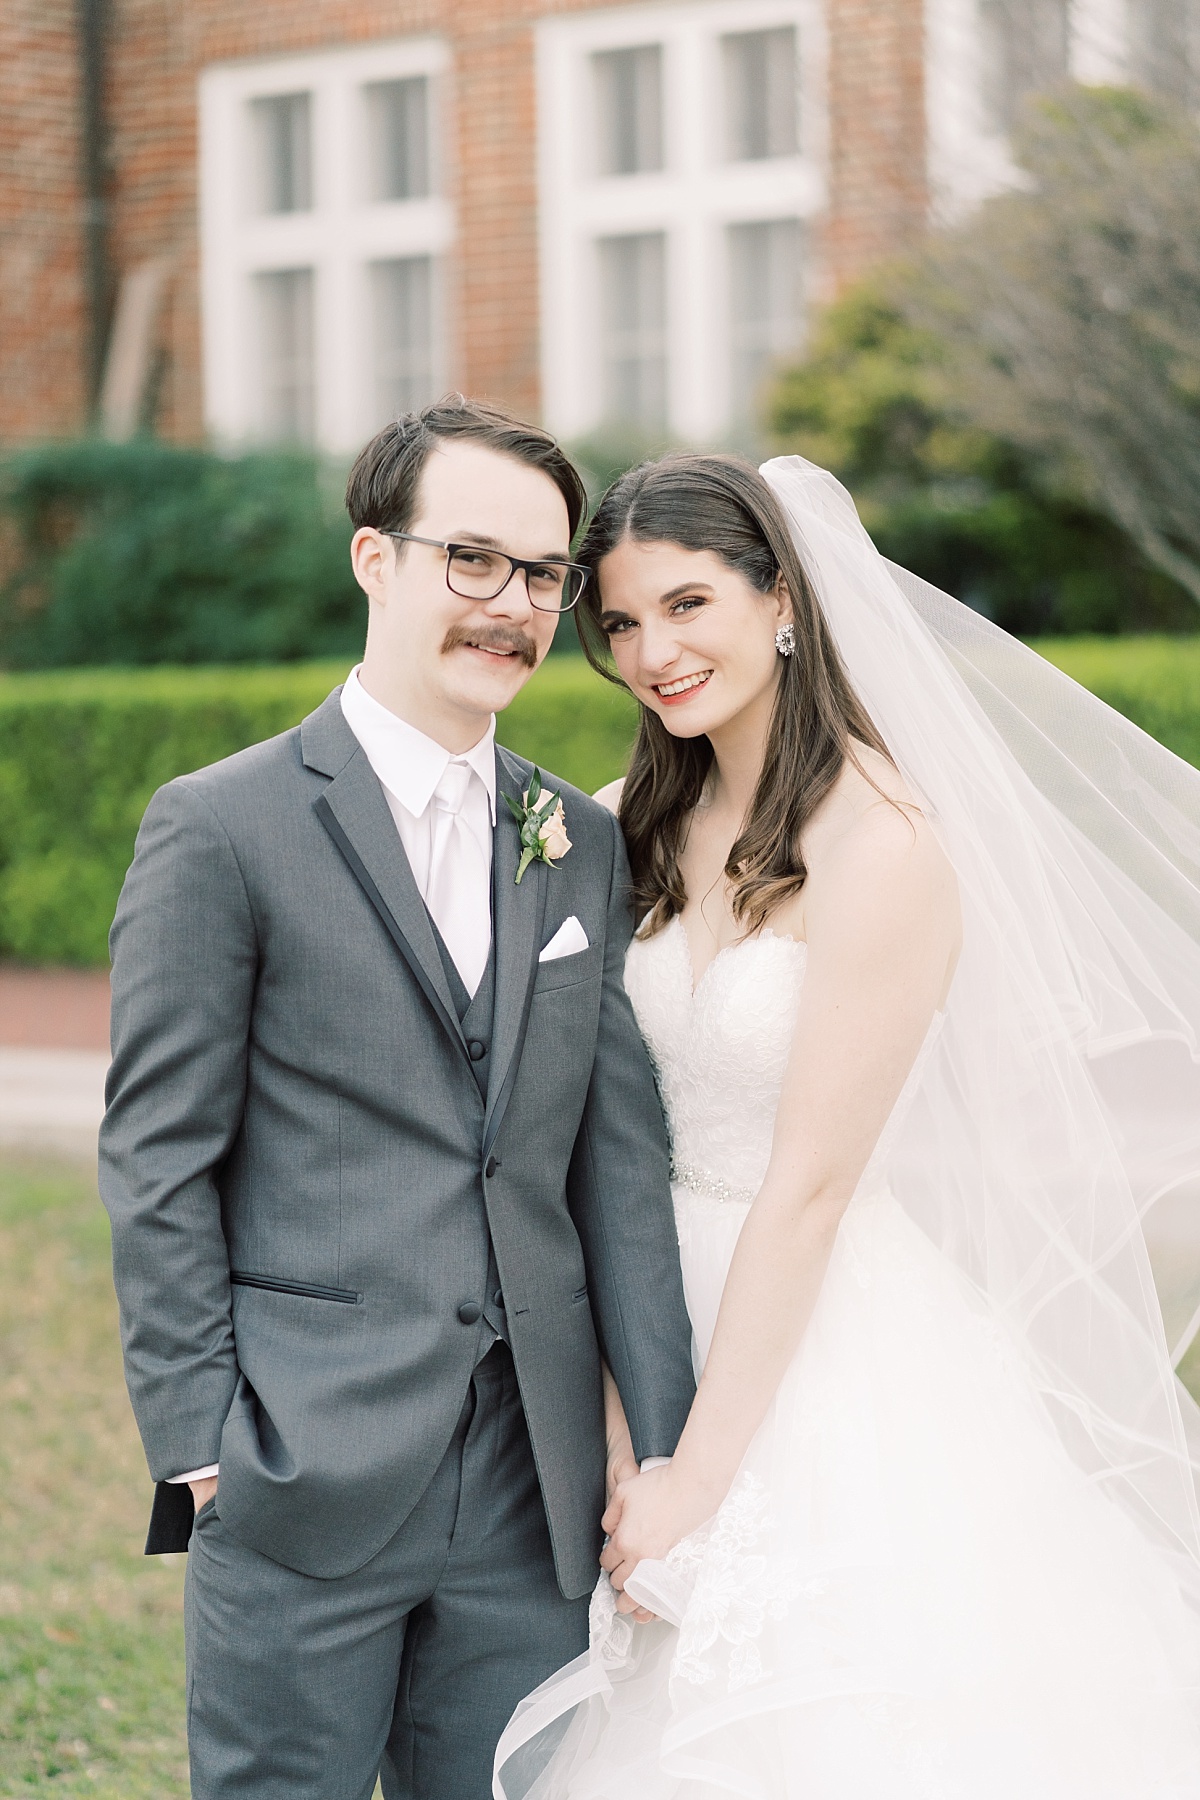 A newlywed Caucasian bride and groom stand together while holding hands and smiling at the camera for their wedding photographer in Austin, Texas.